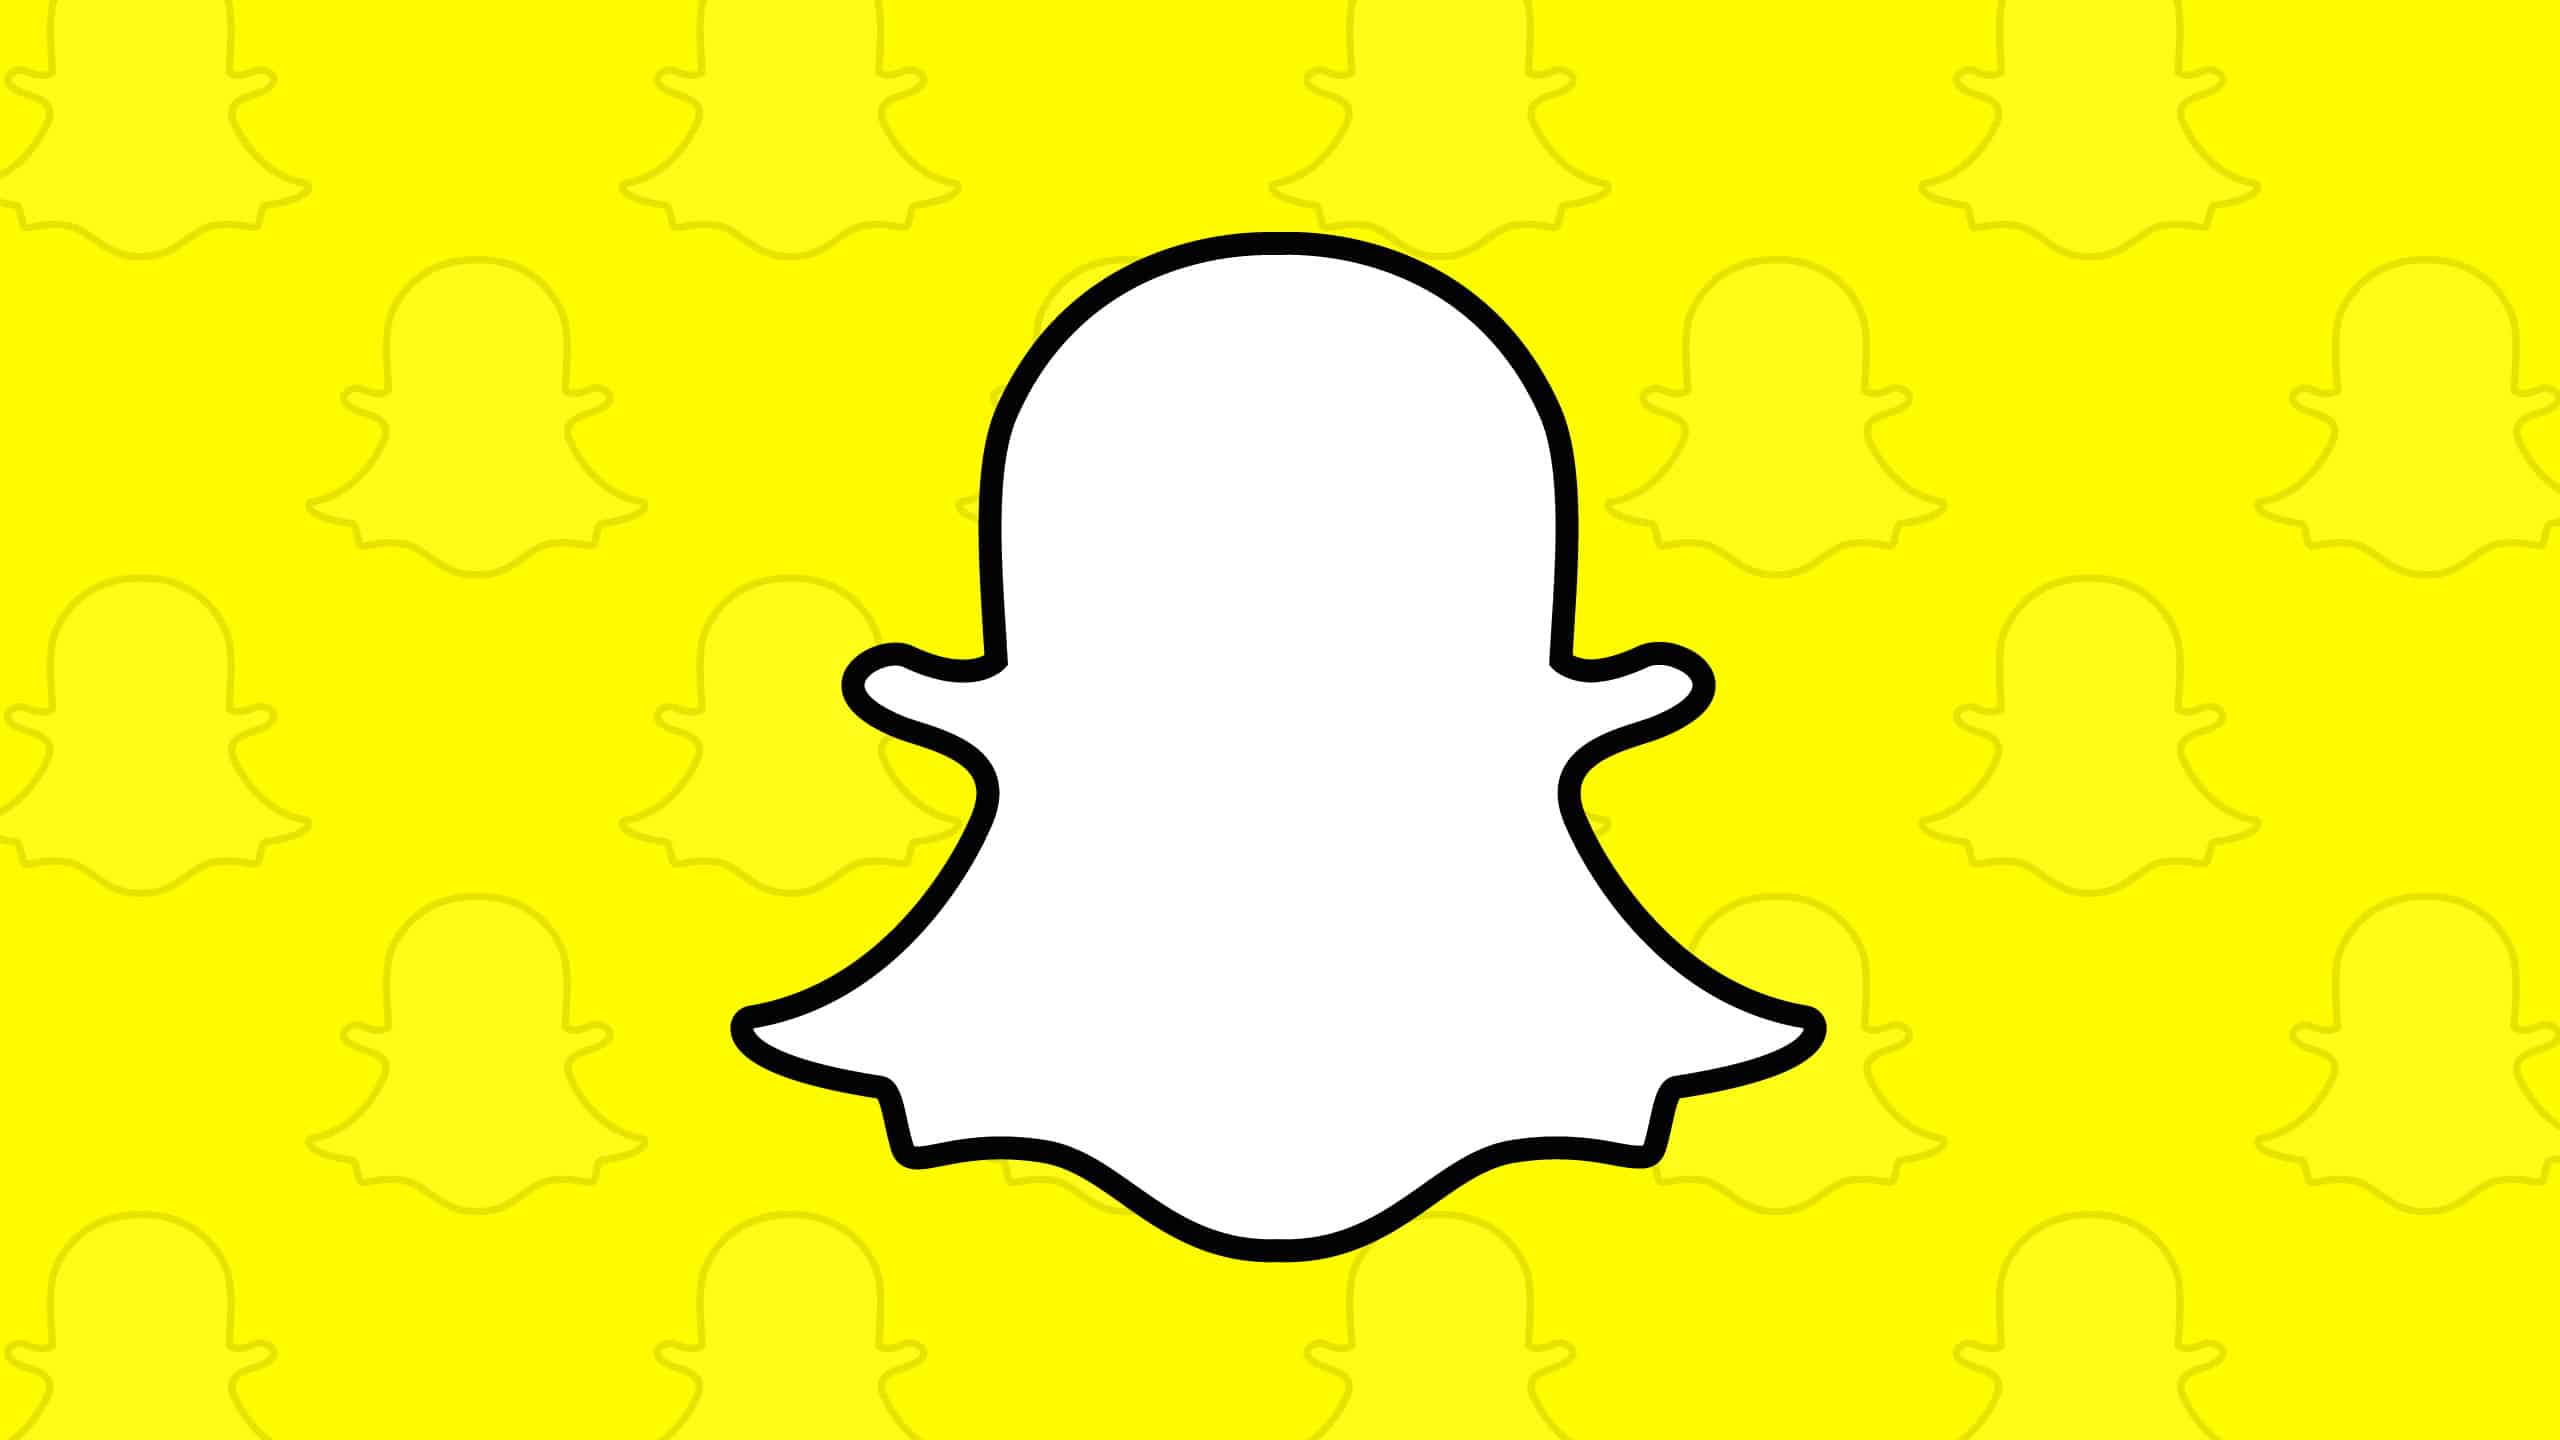 Snapchat We’ve seen social media giants joining the race of Web3 and NFTs. Snapchat has just announced that the photo-sharing app might support NFTs in the future as the company begins testing these features.